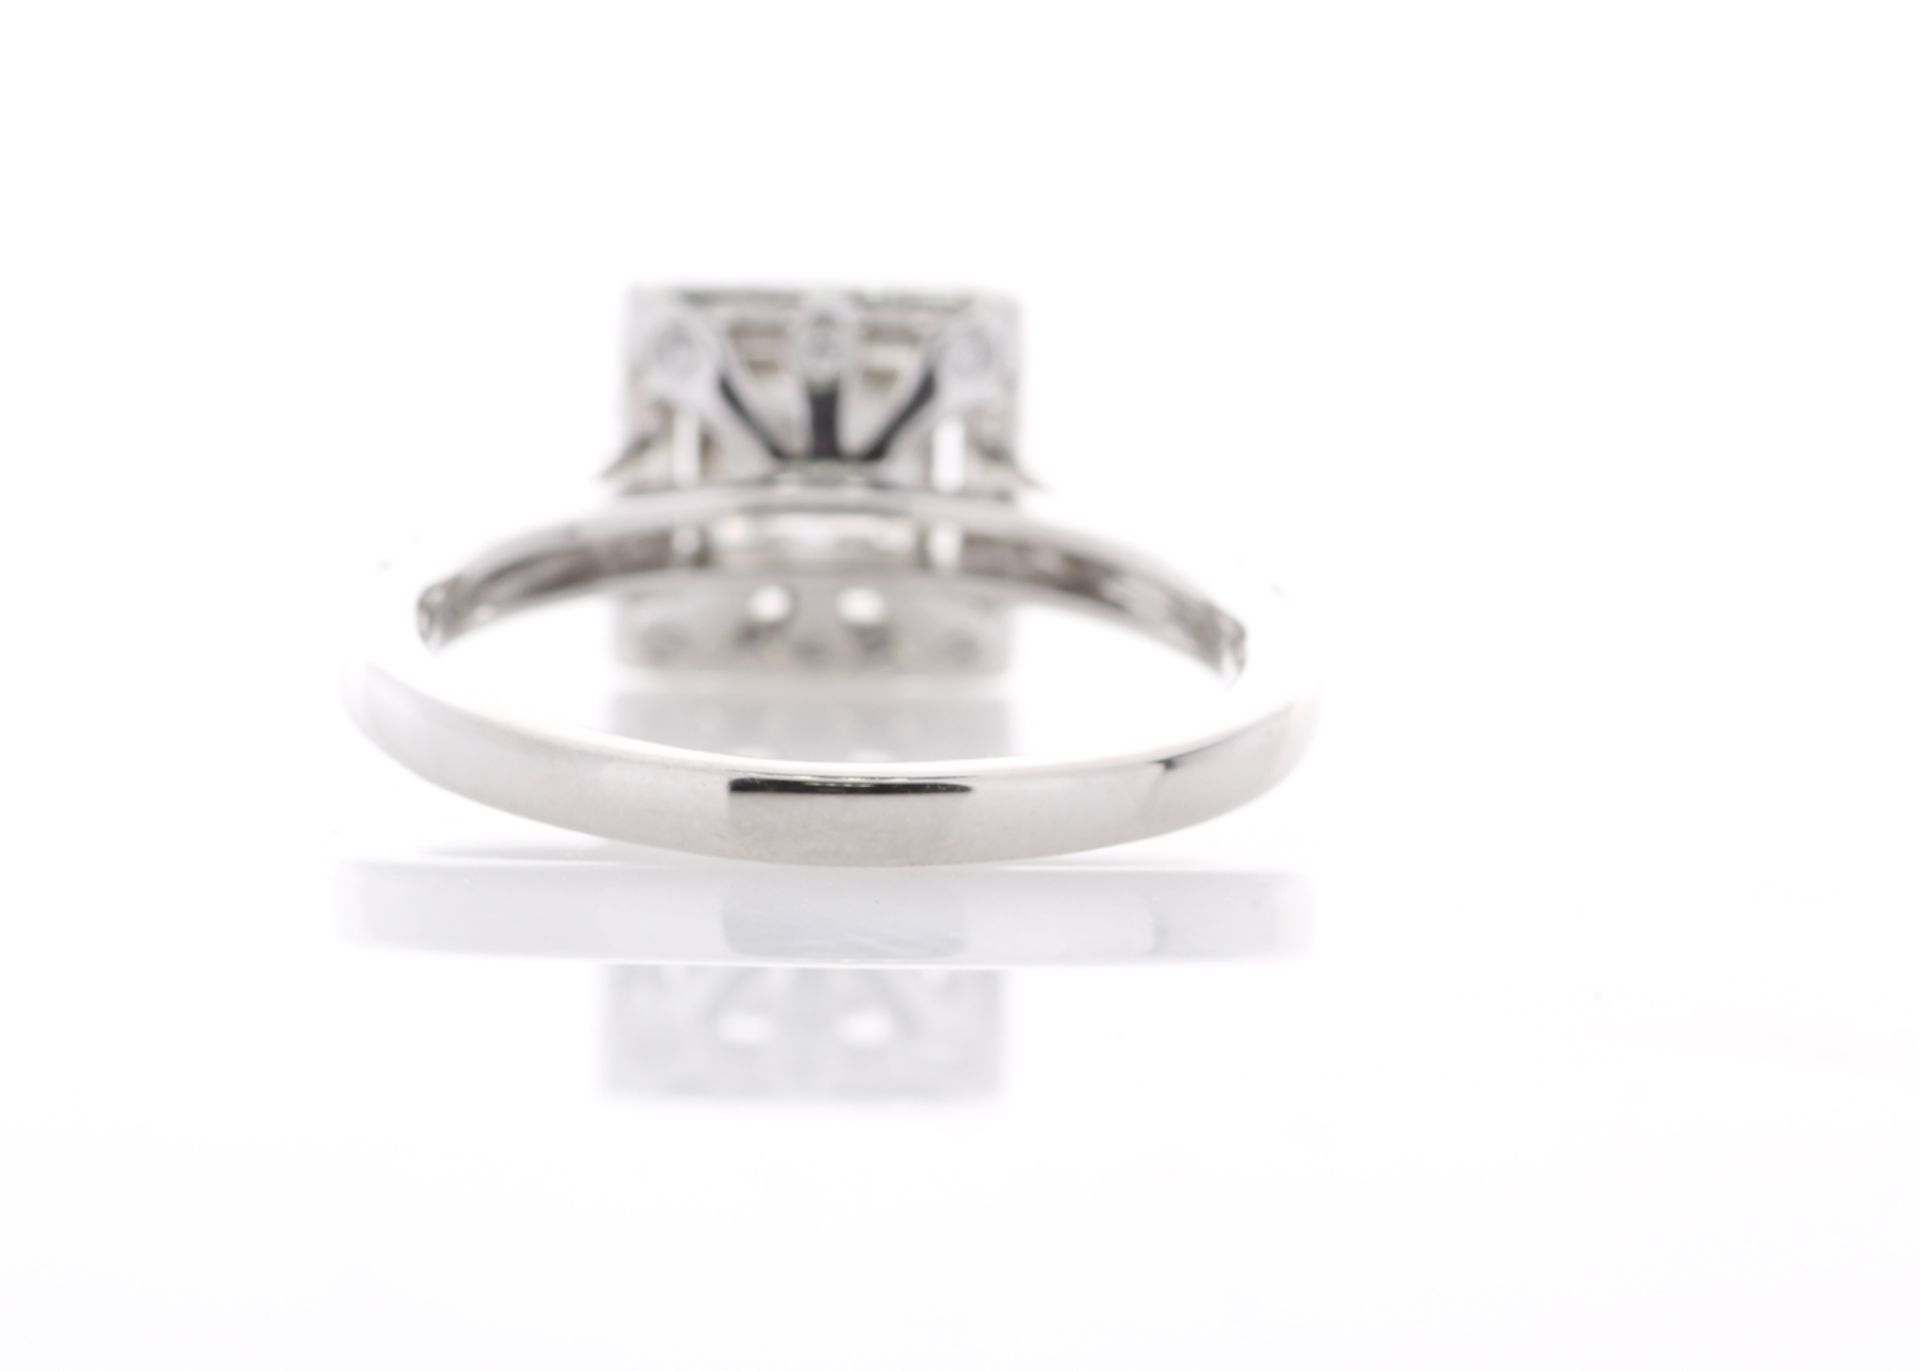 18ct White Gold Single Stone Princess Cut Diamond Ring (1.00) 1.34 Carats - Valued by GIE £22,950.00 - Image 3 of 5